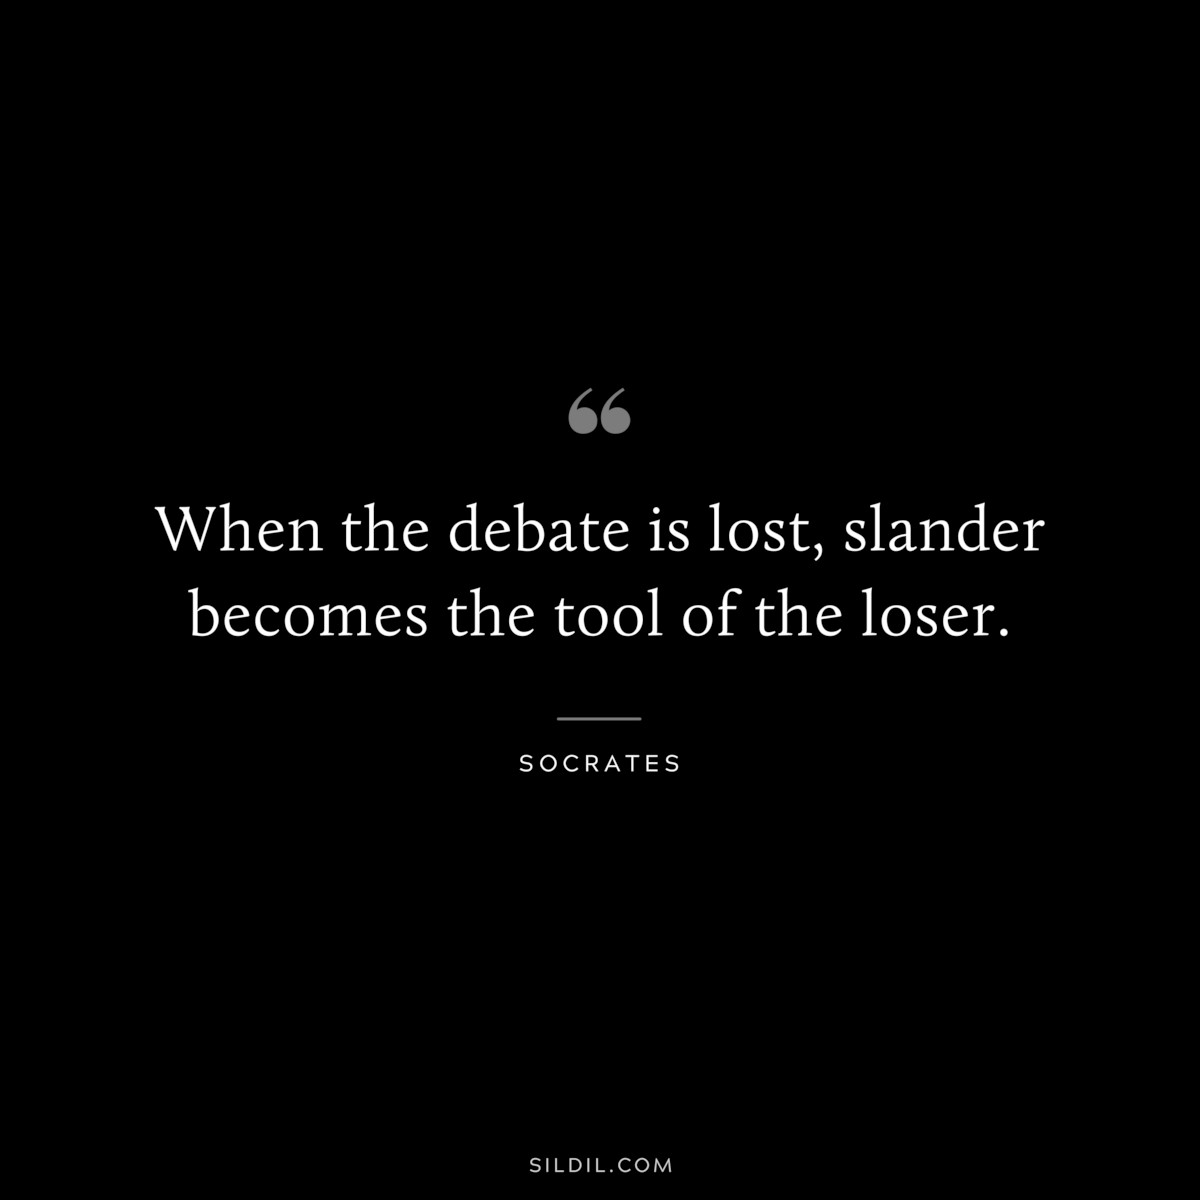 When the debate is lost, slander becomes the tool of the loser. ― Socrates